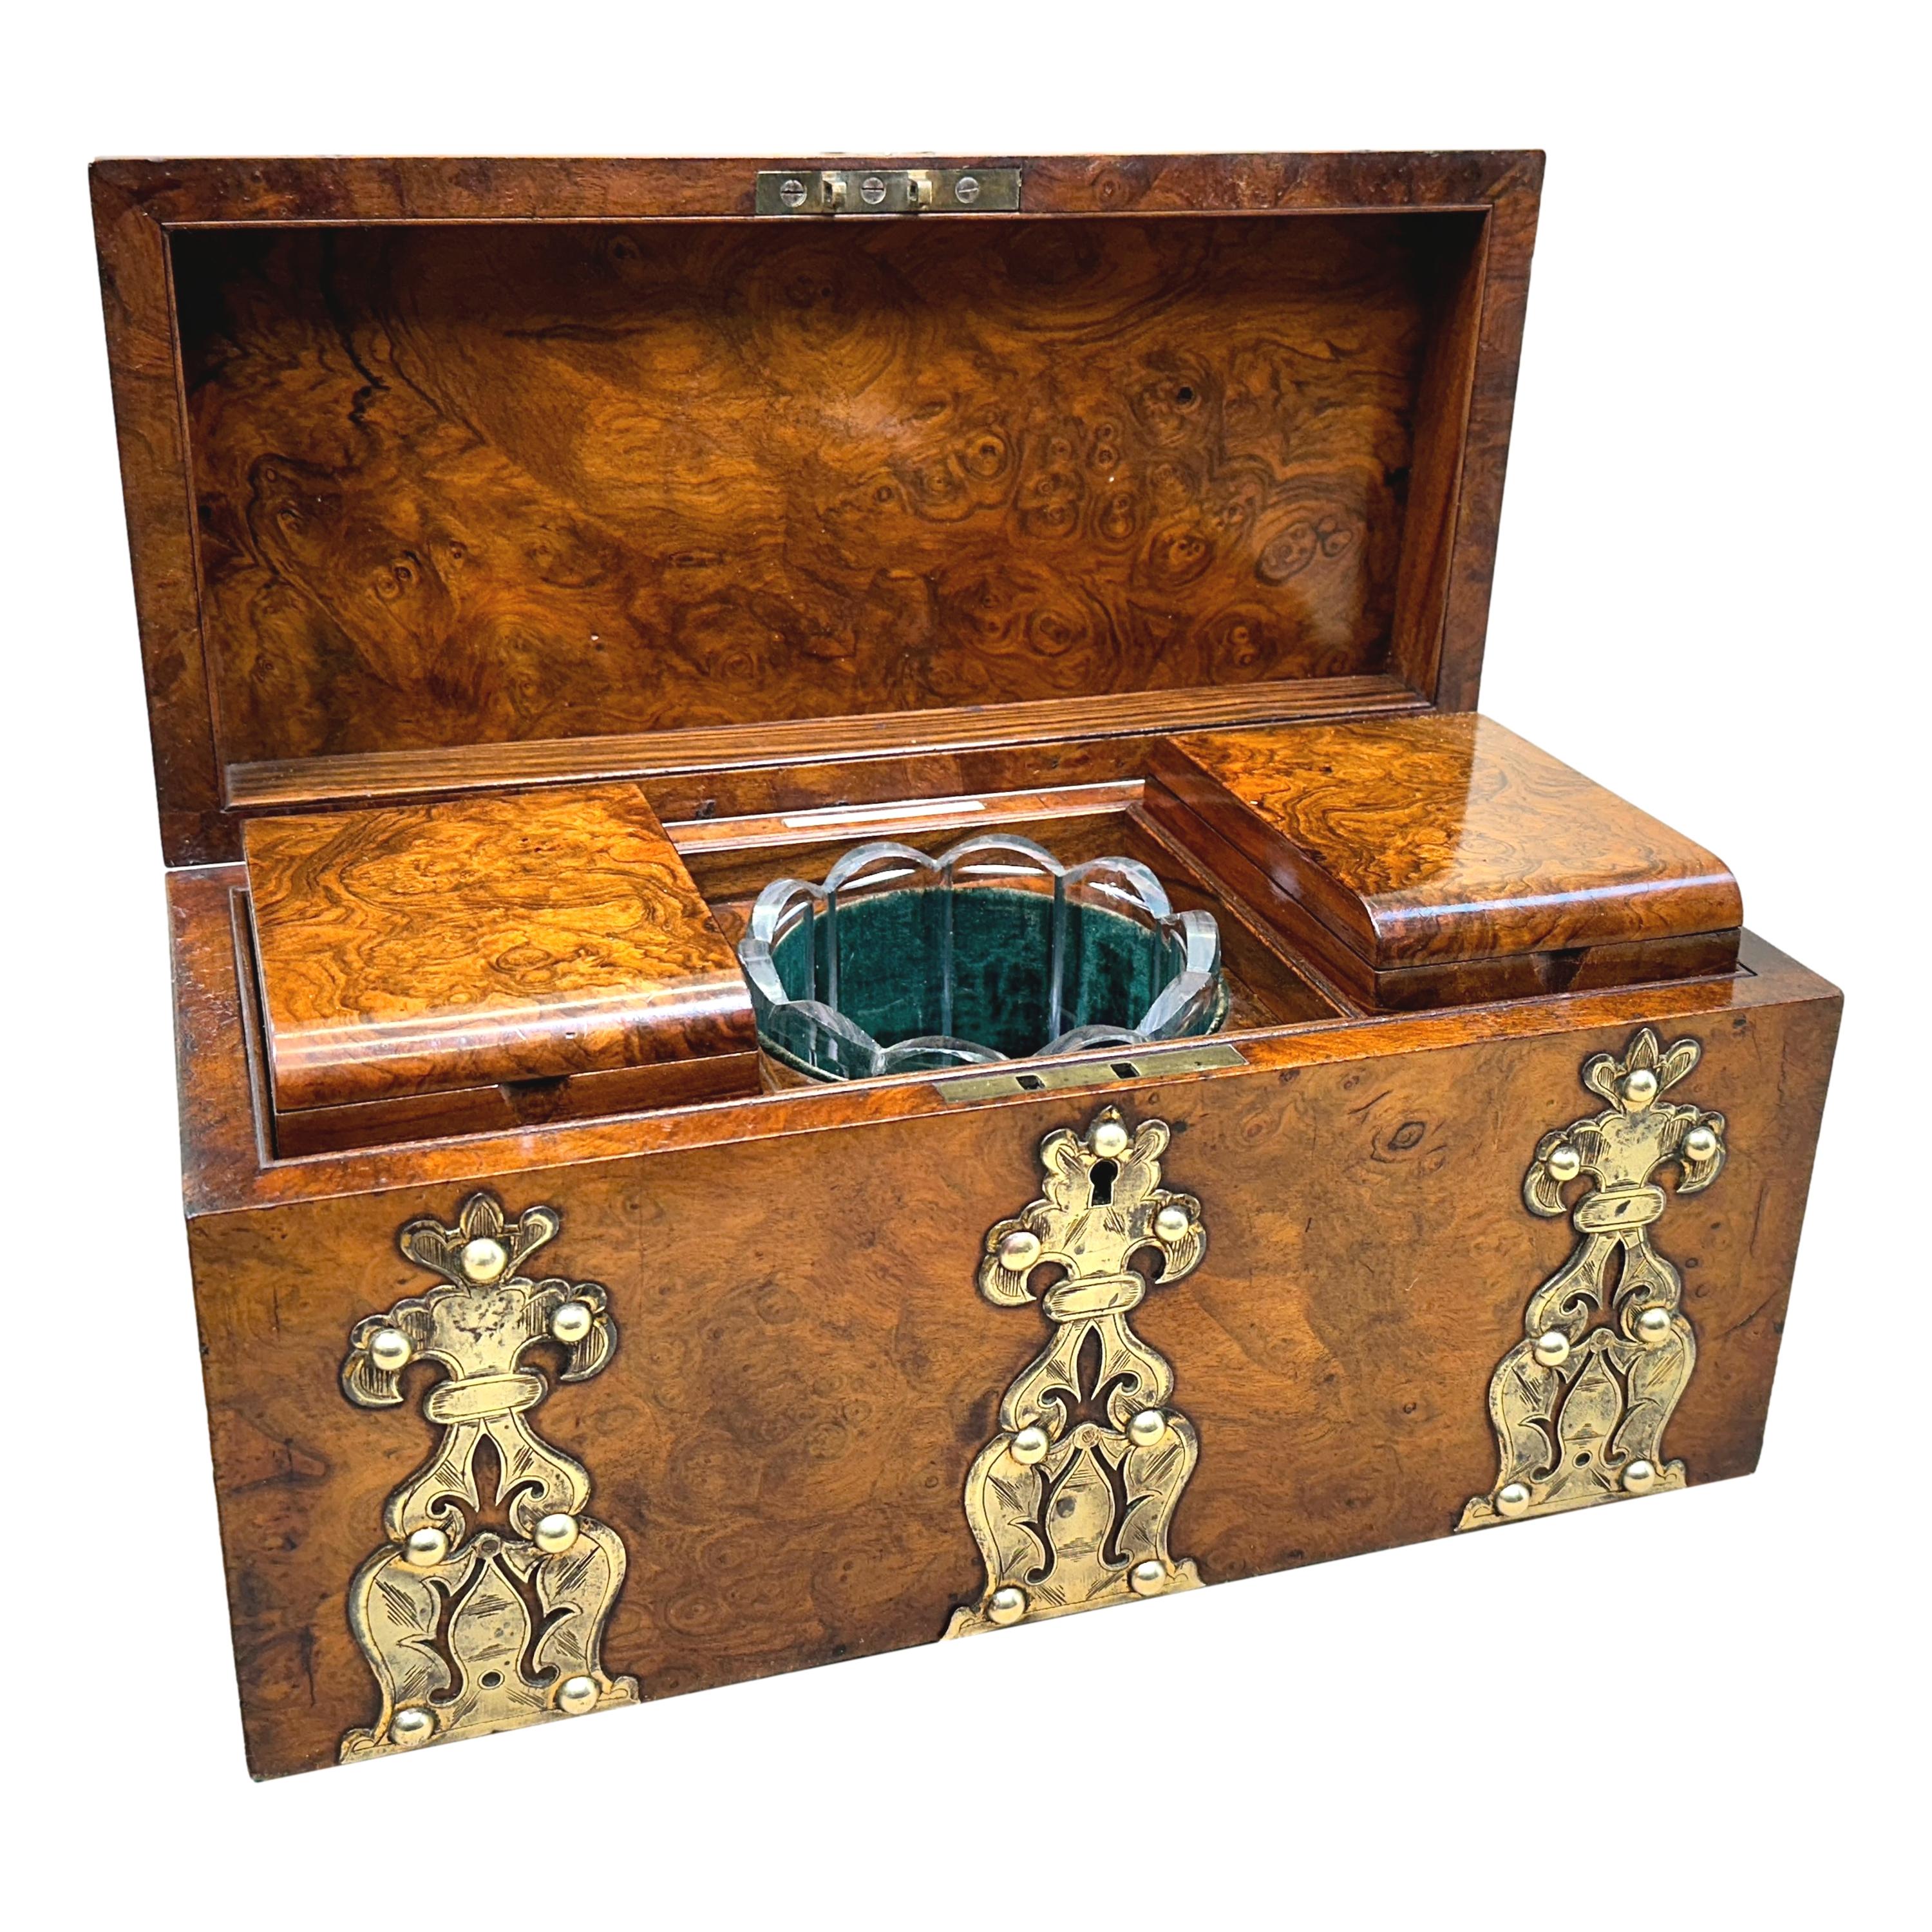 A Superb Quality Mid 19th Century Burr Walnut Tea Caddy Having Original Brass Mounted Decoration And Domed Lid Enclosing Two Removable Lidded Compartments And Glass Mixing Bowl.

Makers Stamp - 